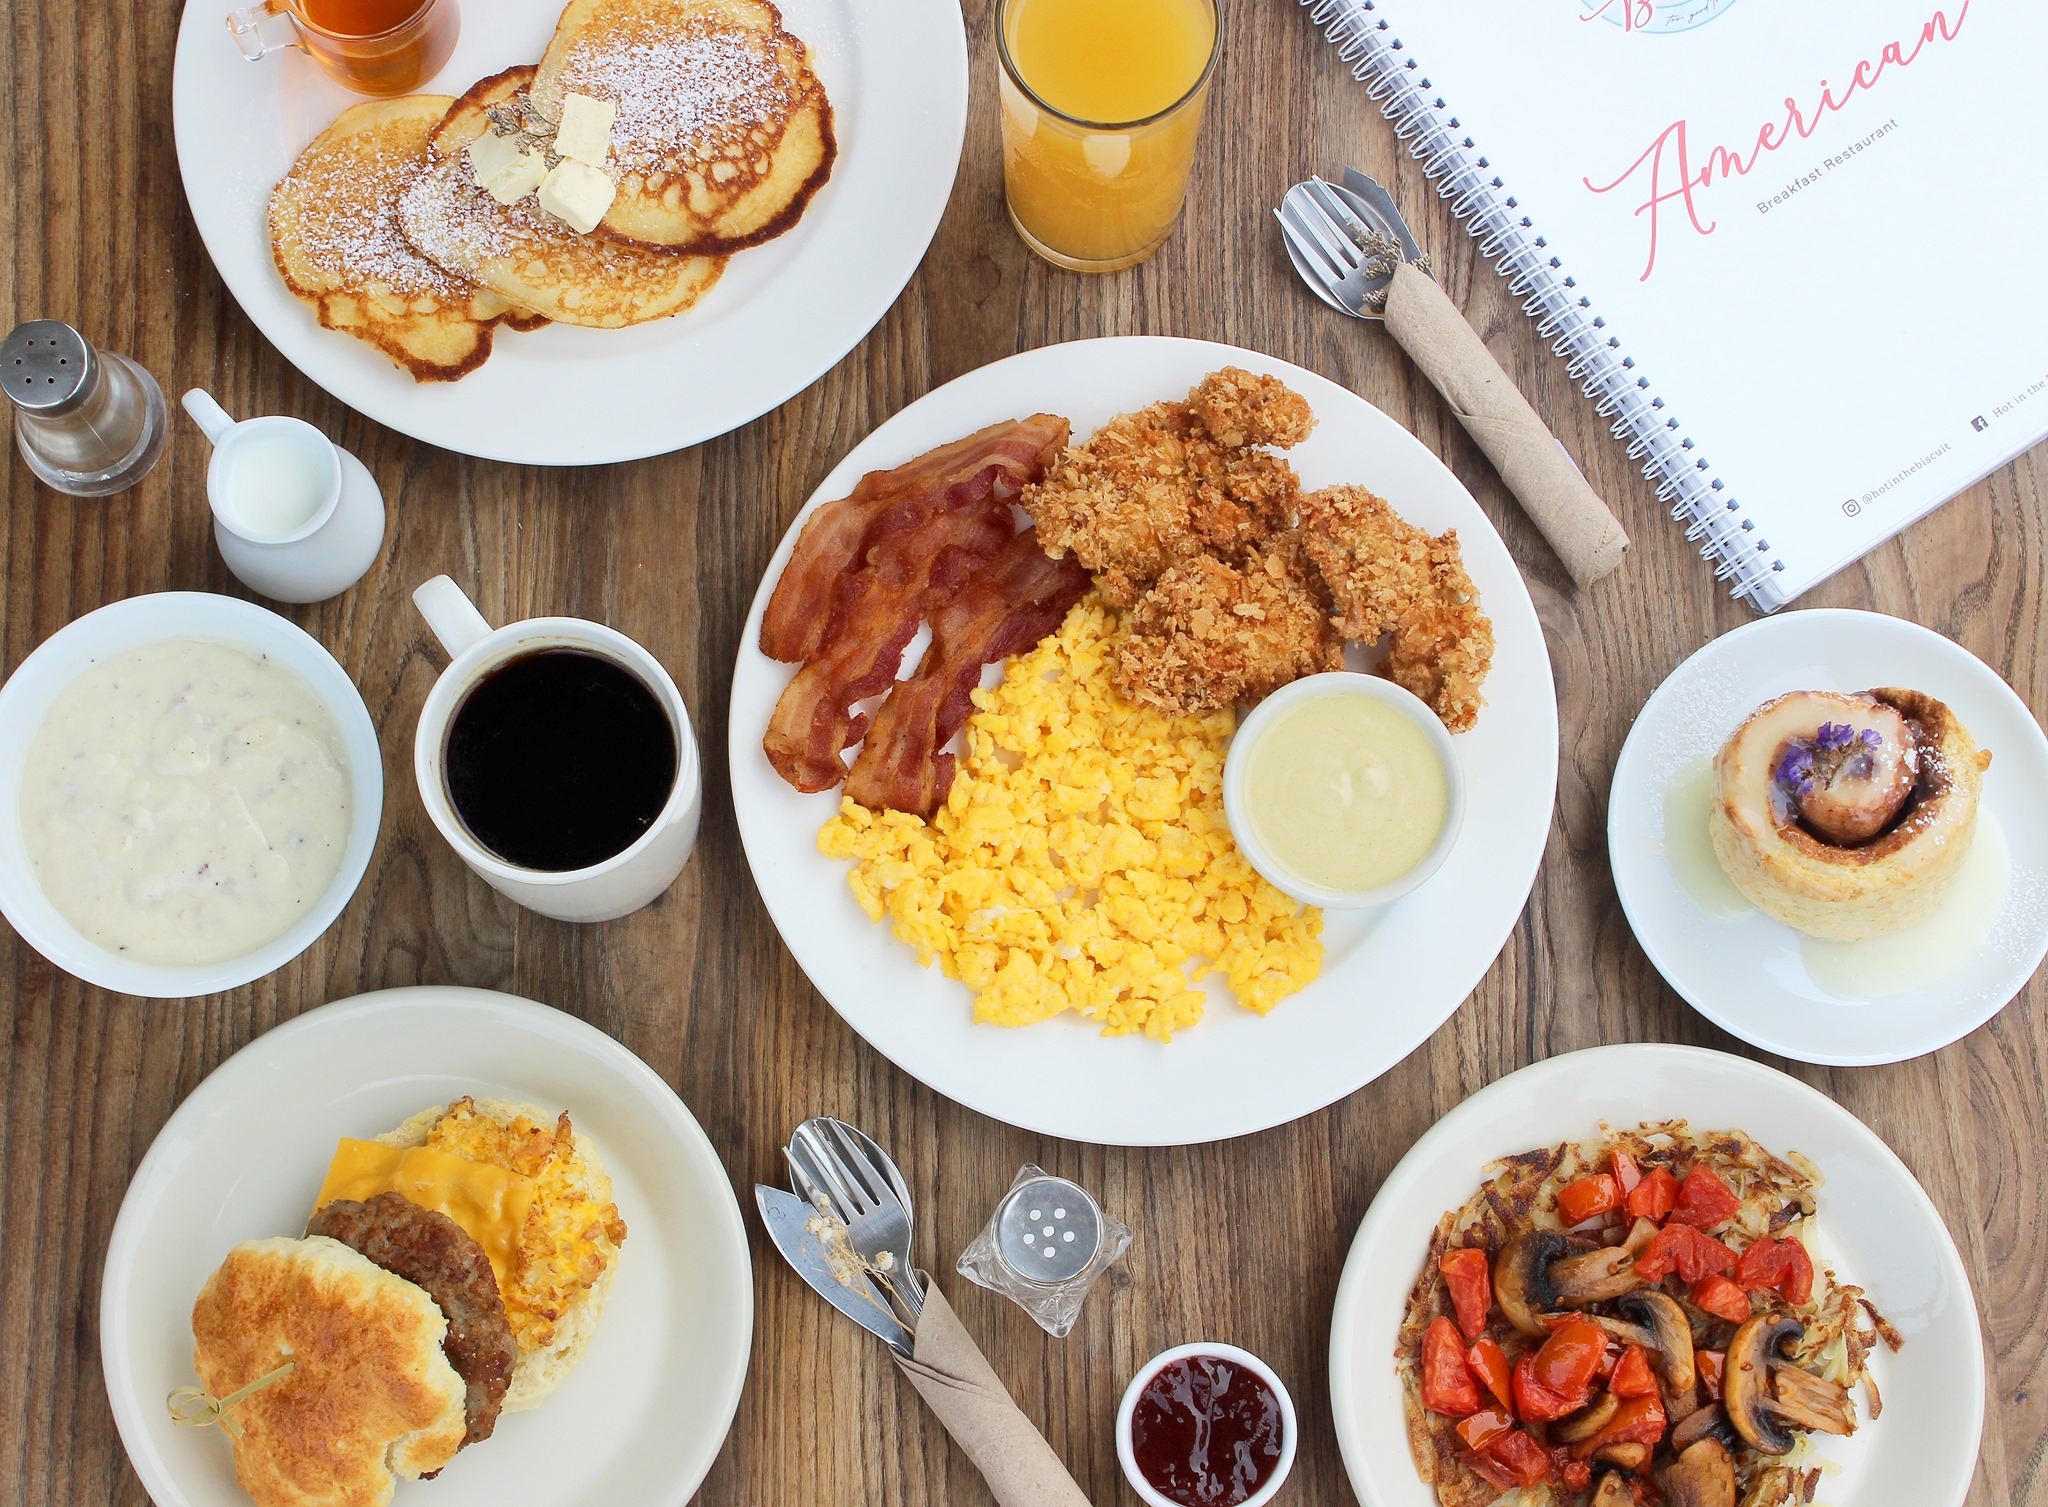 An assortment of typical American breakfast dishes